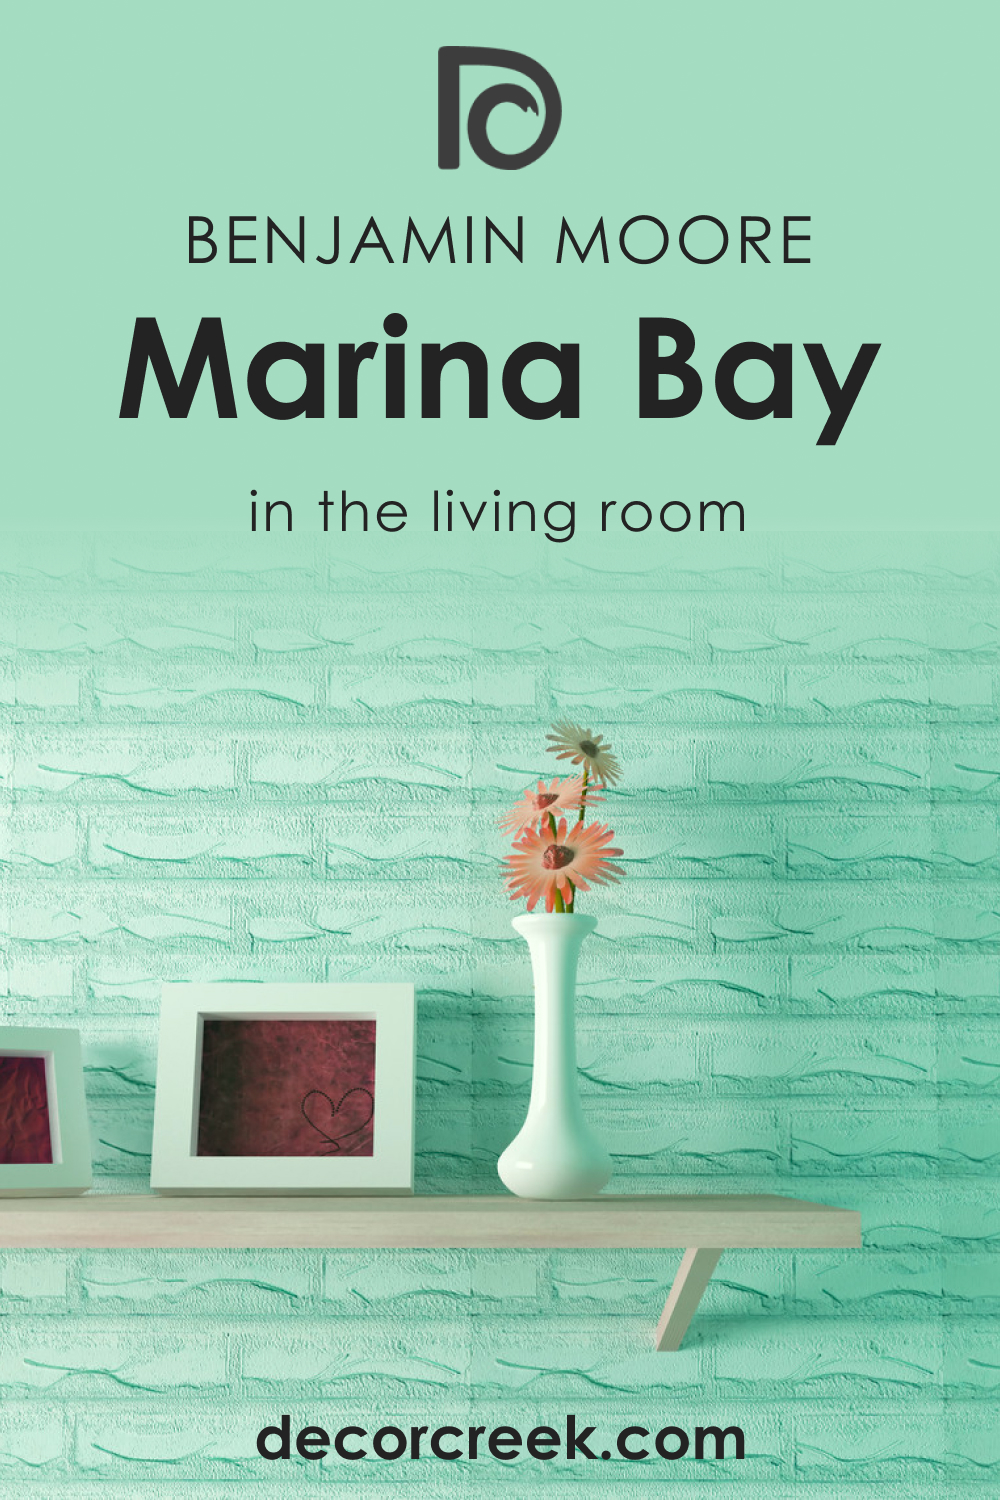 How to Use Marina Bay 2036-50 in the Living Room?